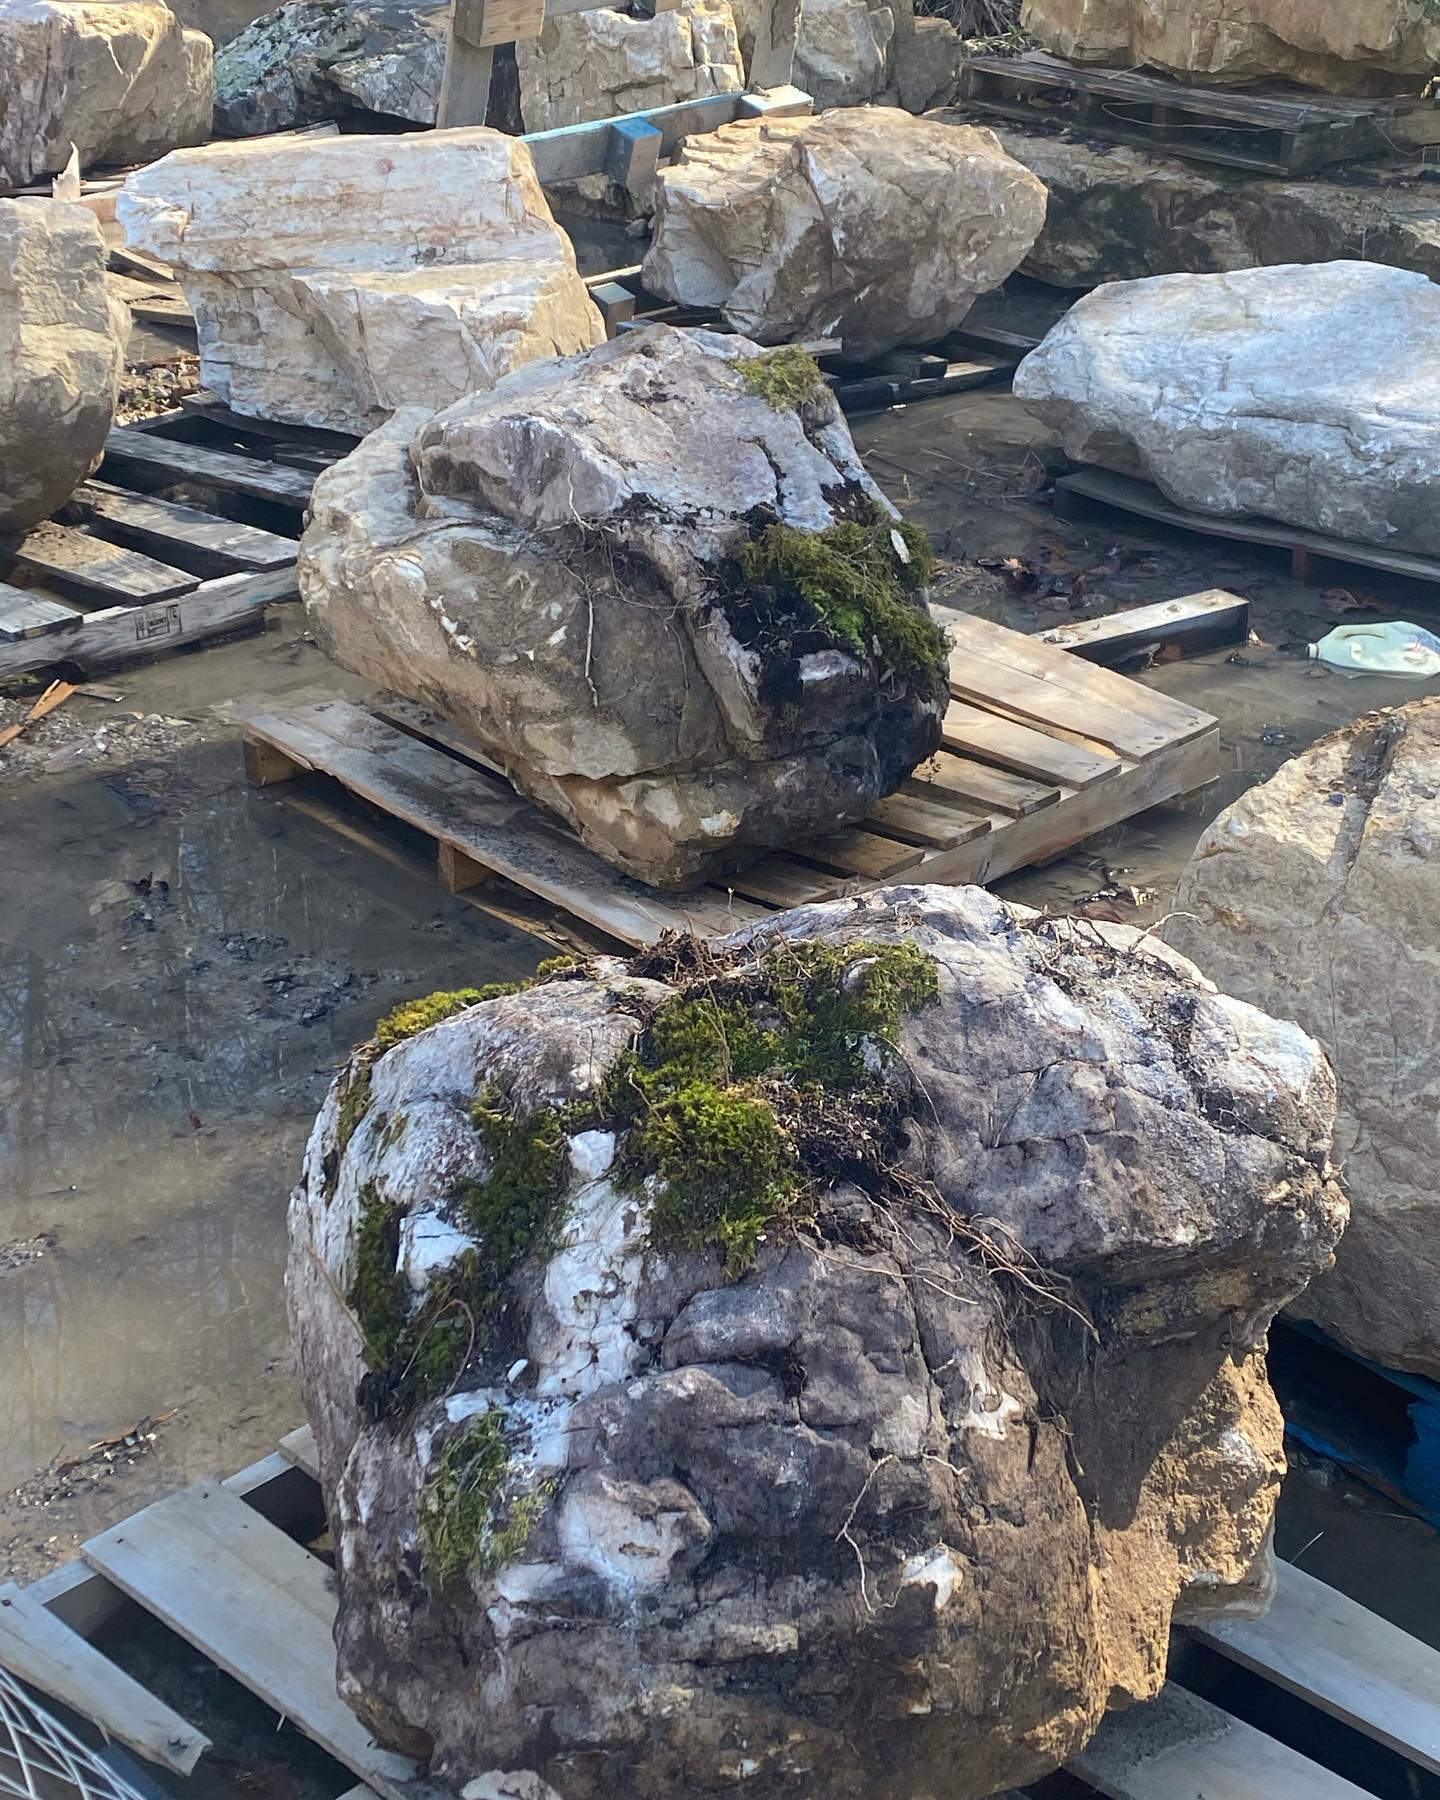 These boulders were selected for a specific application in a landscape for their shape and texture.